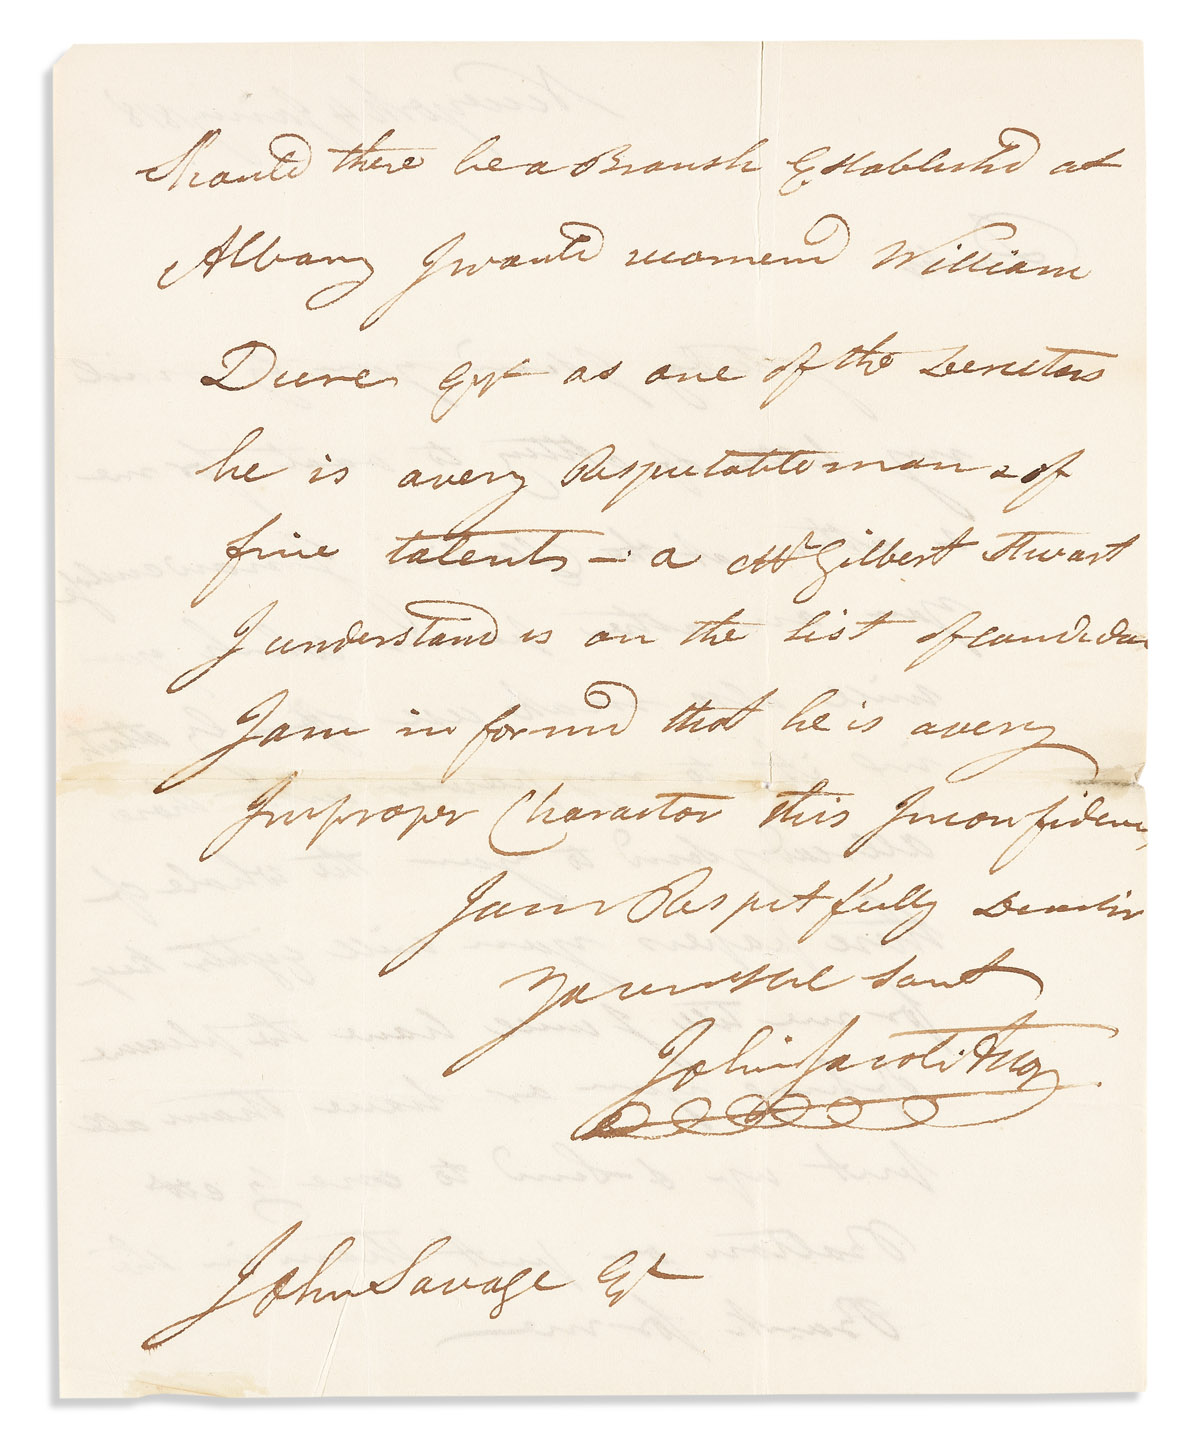 ASTOR, JOHN JACOB. Autograph Letter Signed, as President of the NY branch of the Bank of the United States (BUS), to BUS Director John